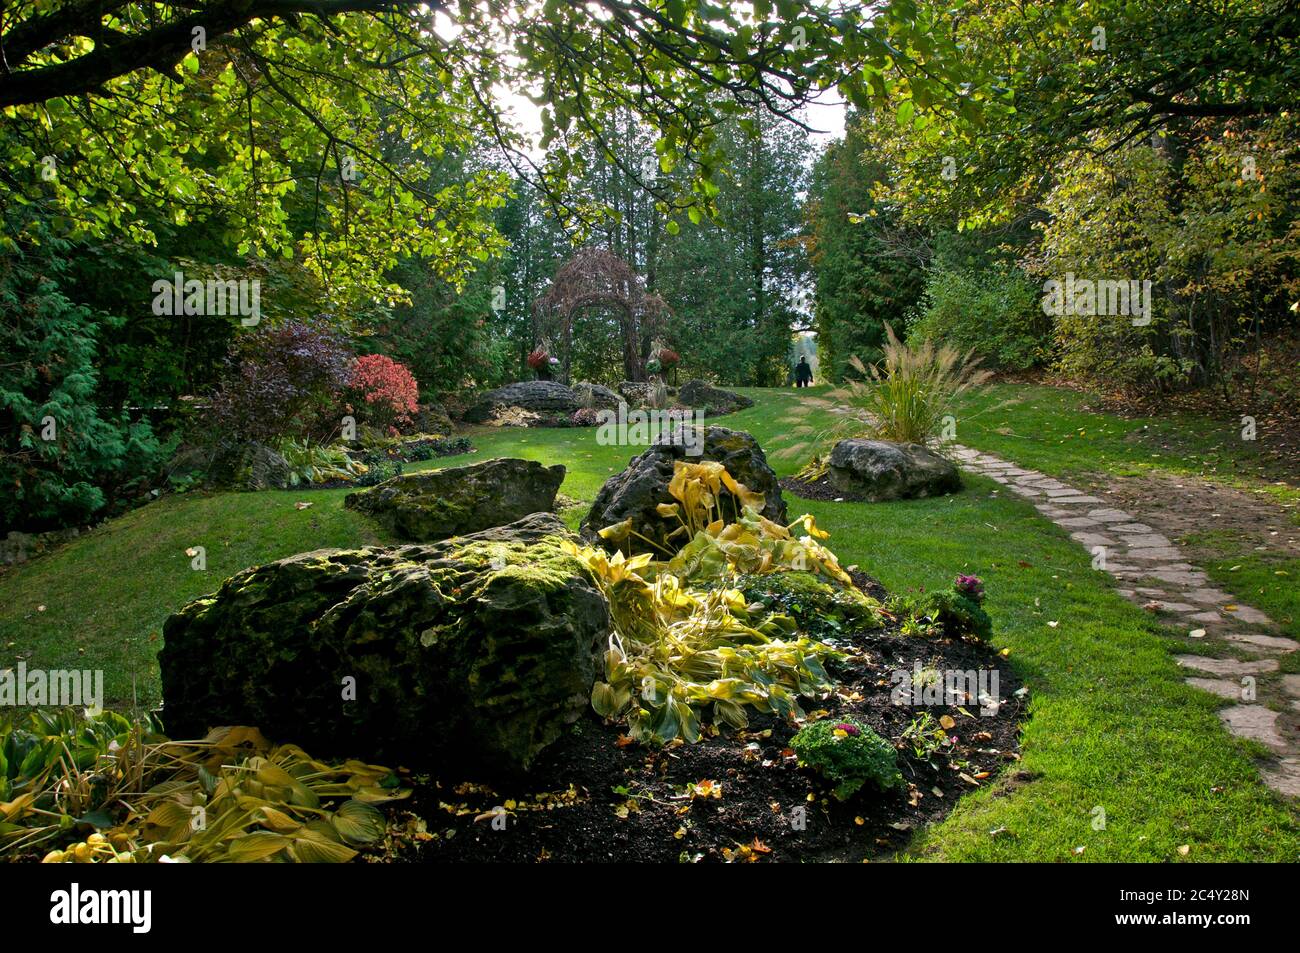 Backyard garden of the  tourist resort in Ontario, Canada with a footpath in stone material Stock Photo